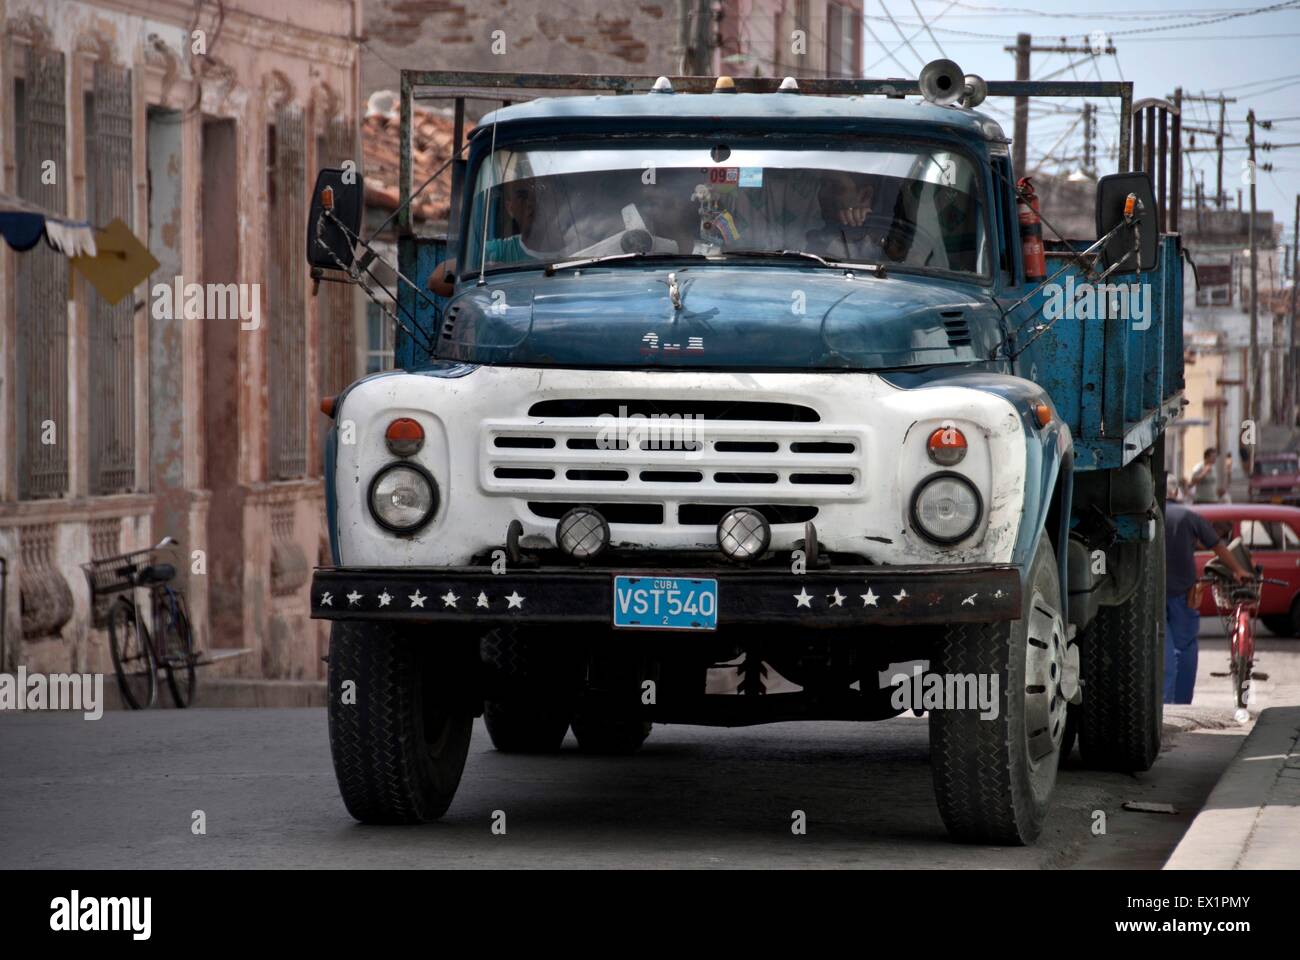 A ZIL 130 vintage Soviet truck in the streets of Cienfuegos, Cuba Stock Photo